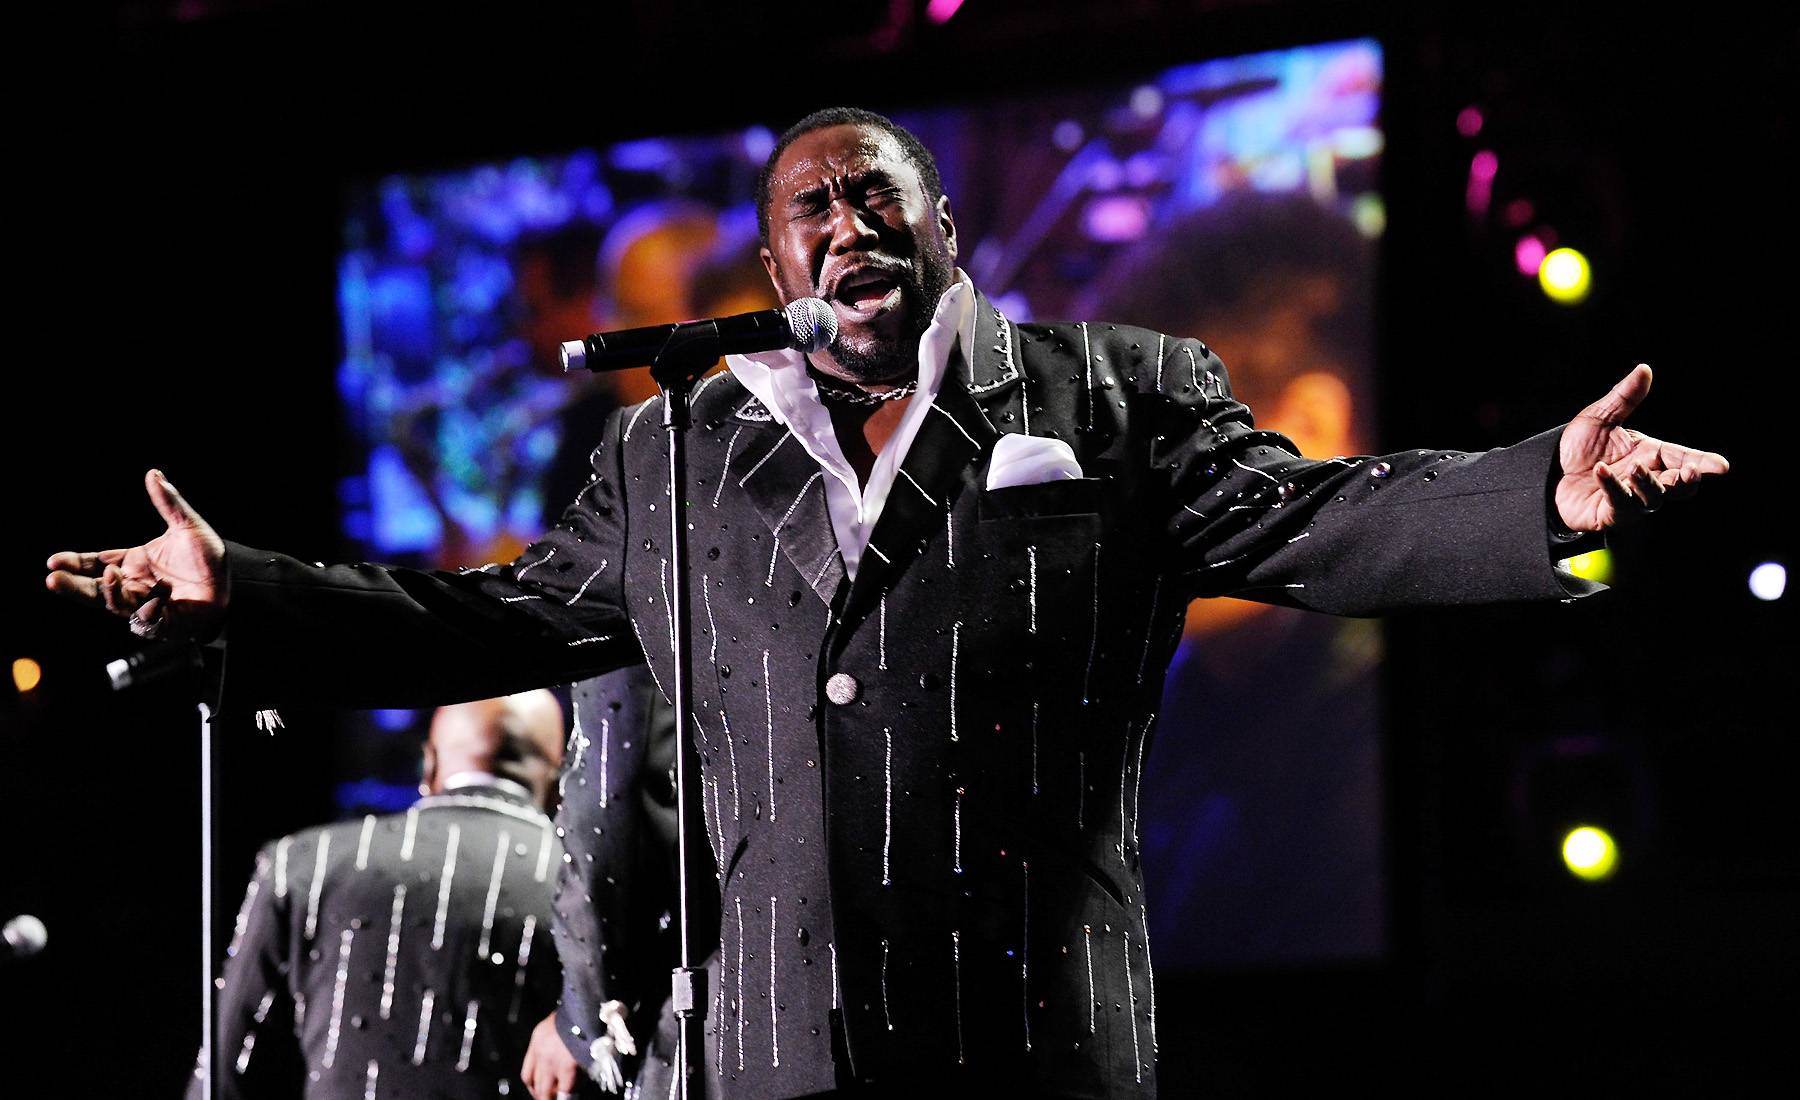 The Spotlight - Although Eddie Levert has always been a member of the O'Jays, he has done solo work from time to time even took on the big screen in 2006's movie, Fighting Temptations.(Photo: Ethan Miller/WireImage)